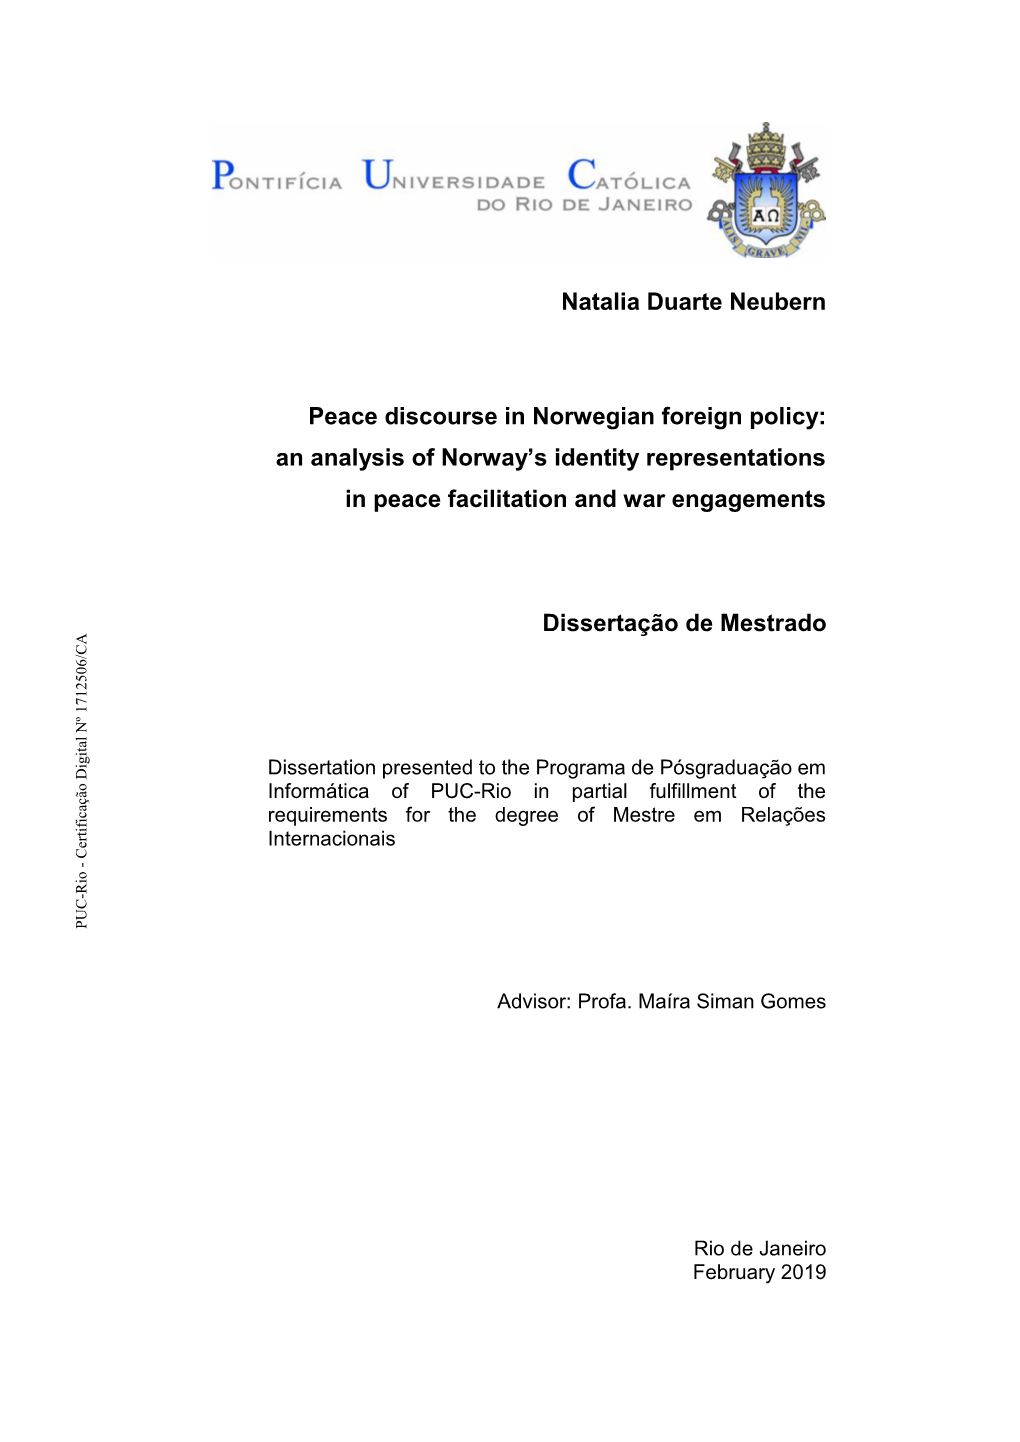 An Analysis of Norway's Identity Representations in Peace